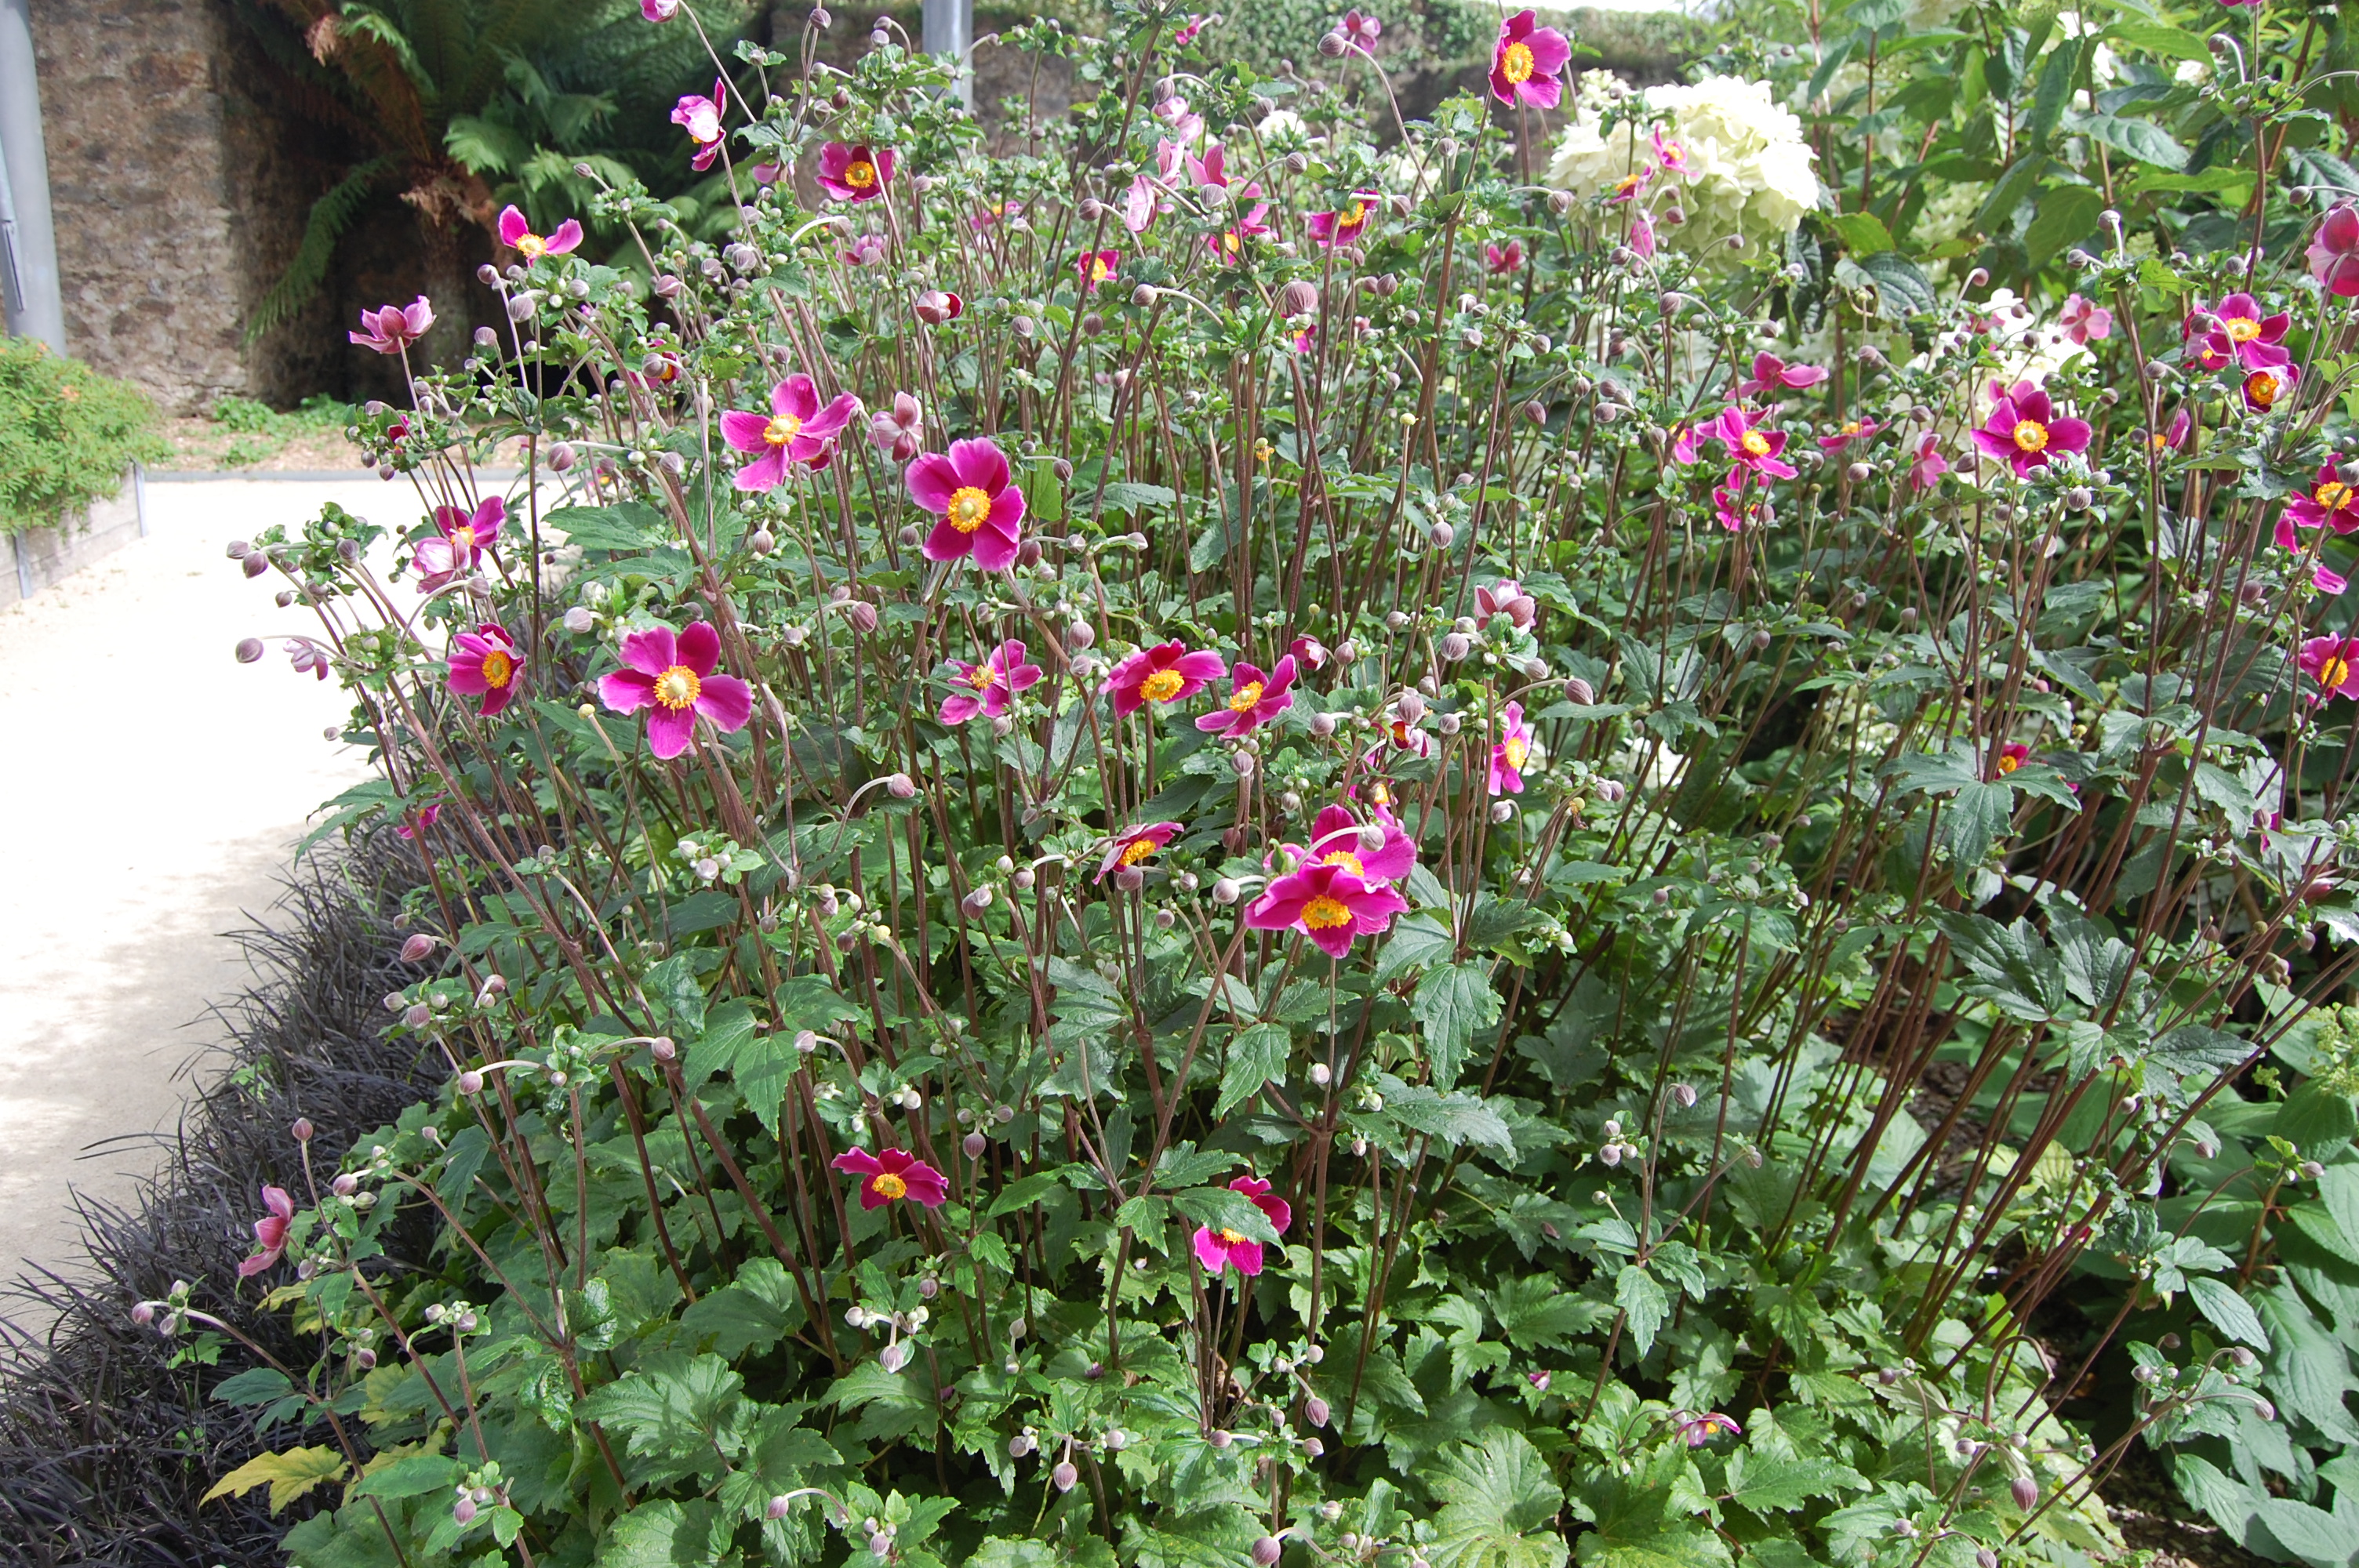 Anemone hupehensis 'Splendens' | landscape architect's pages